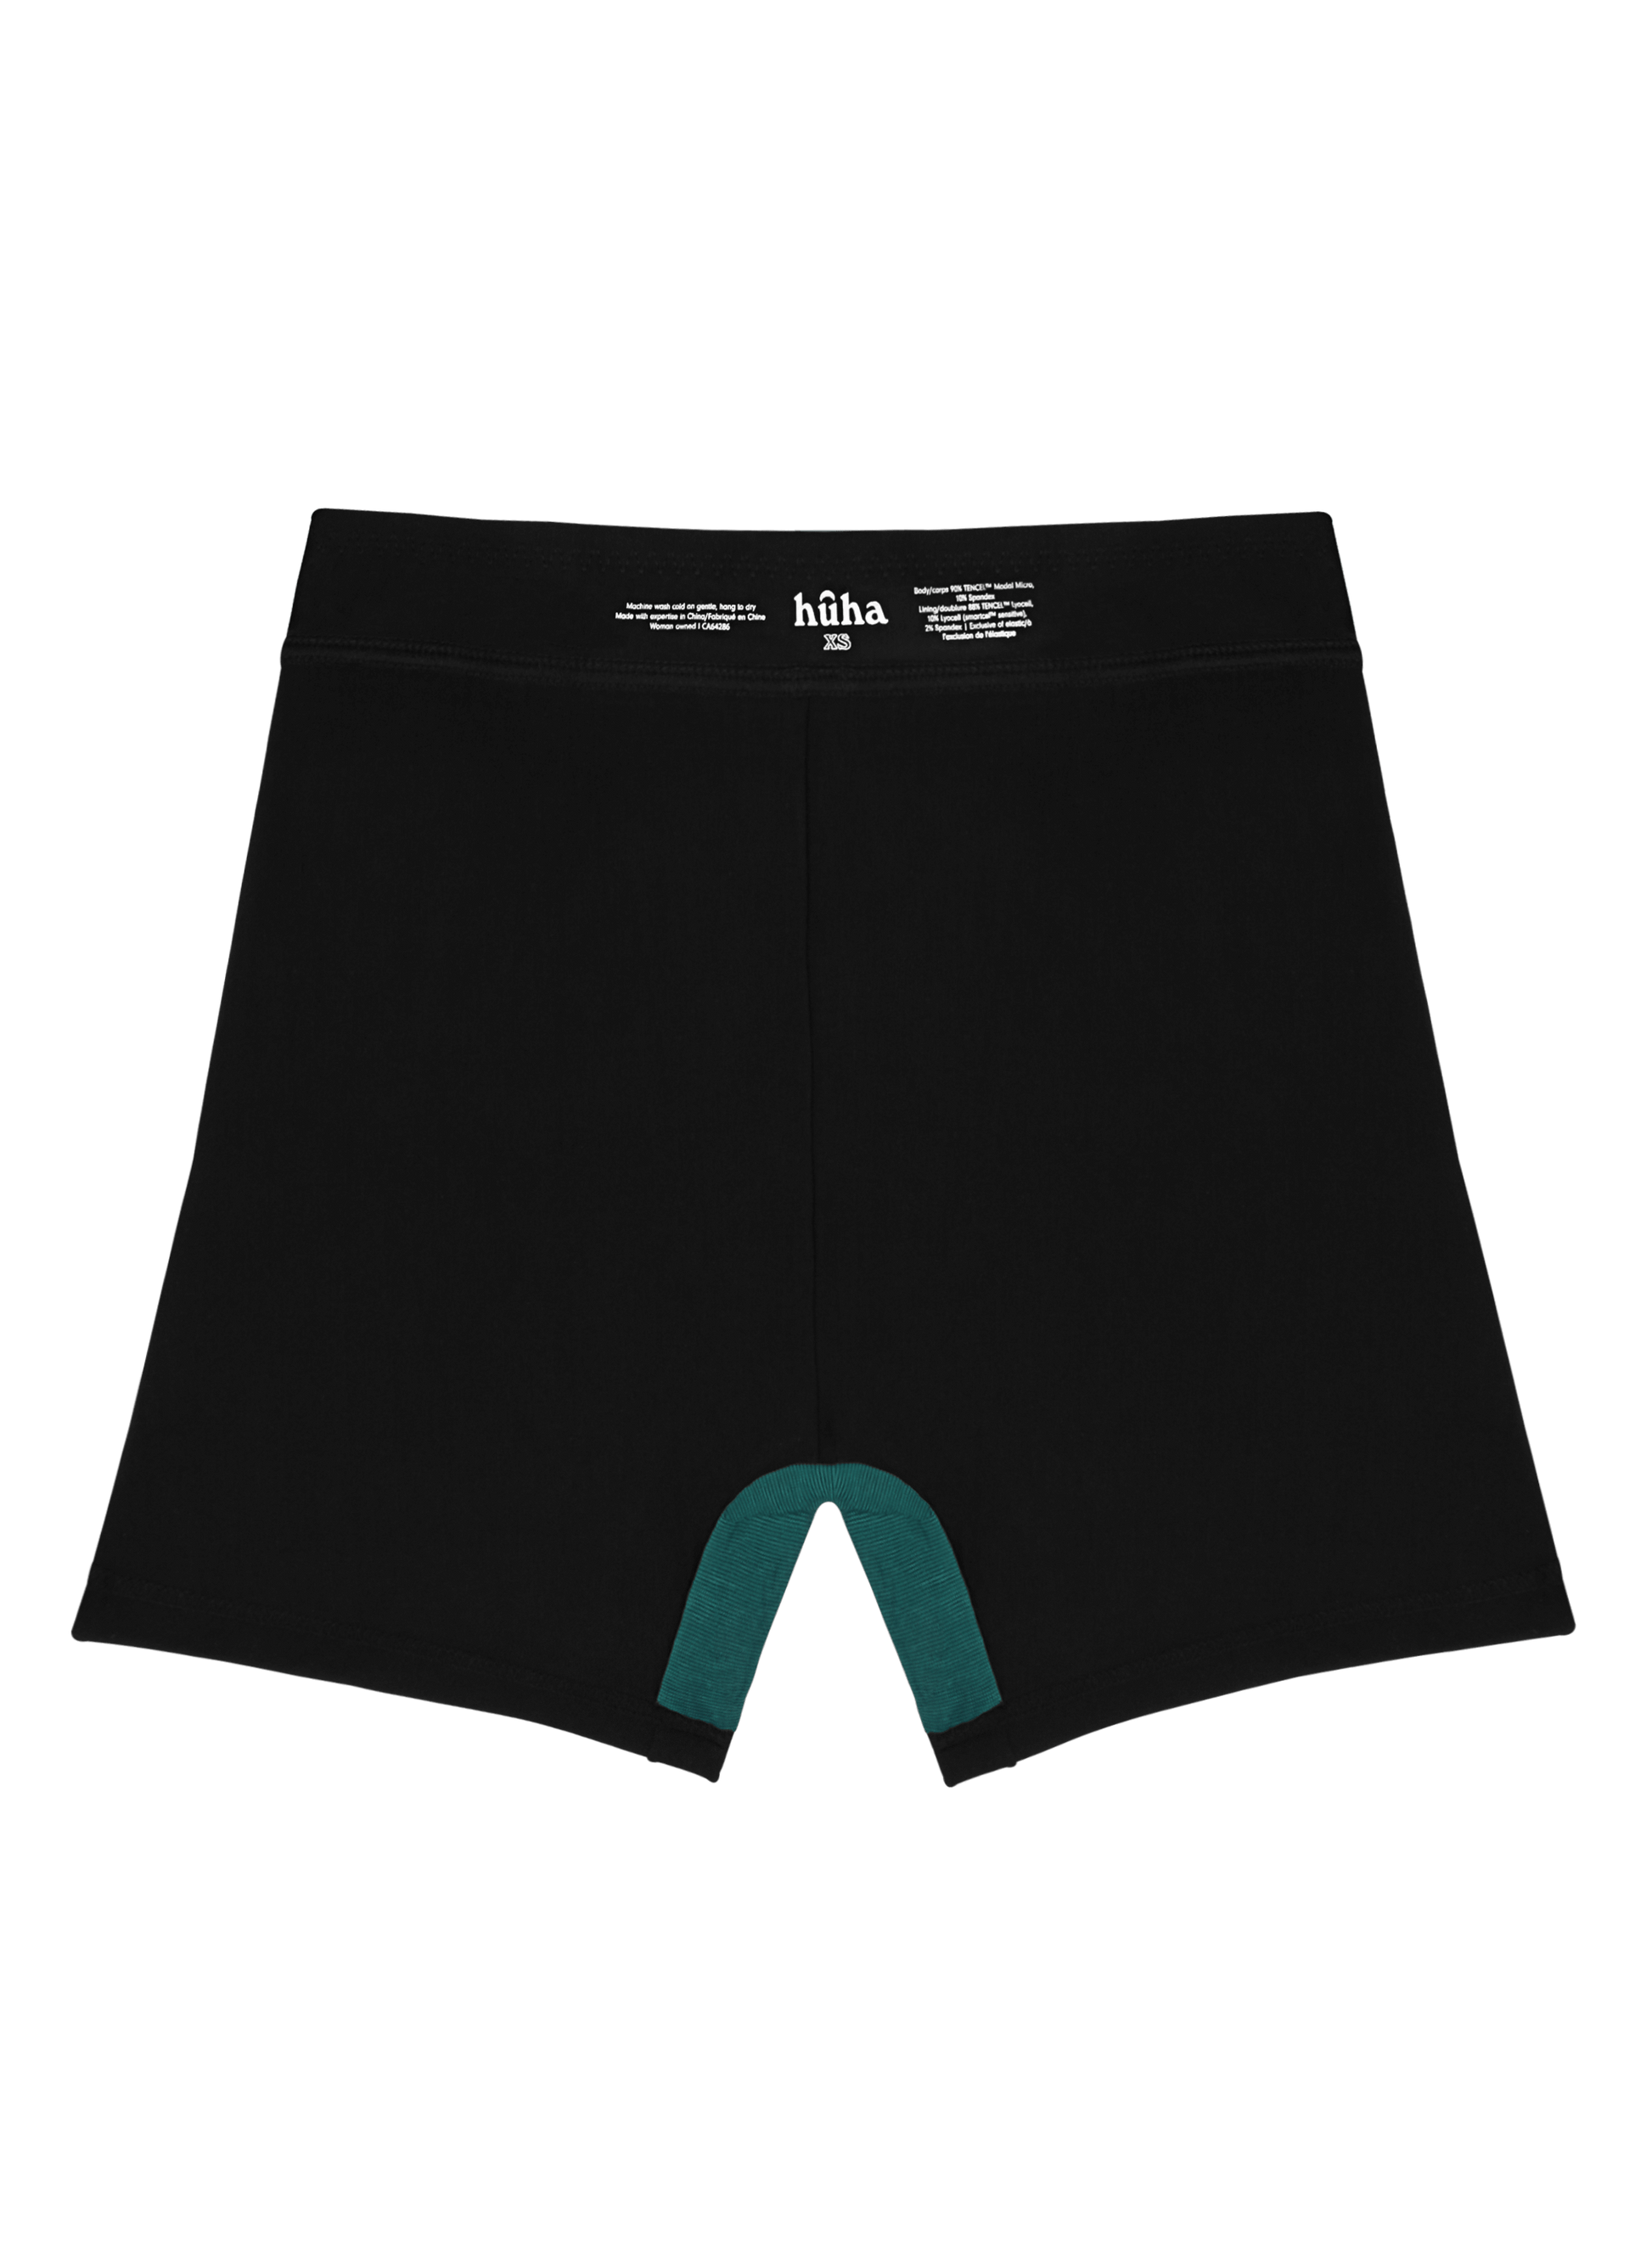 Flattering Women's Boxer Shorts Are This Summer's Surprise